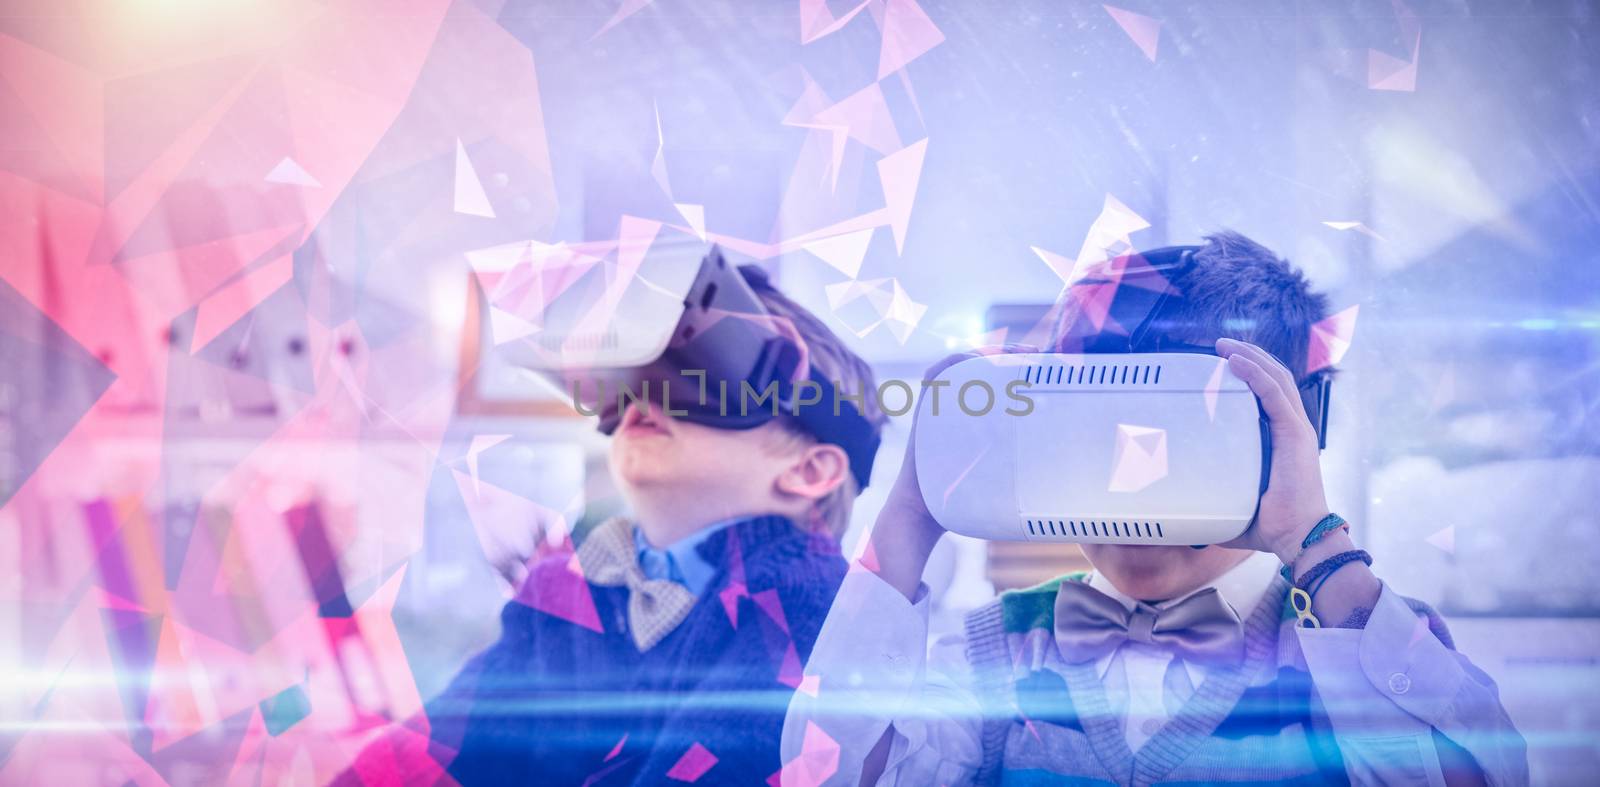 Dark abstract design against business people wearing virtual reality headsets